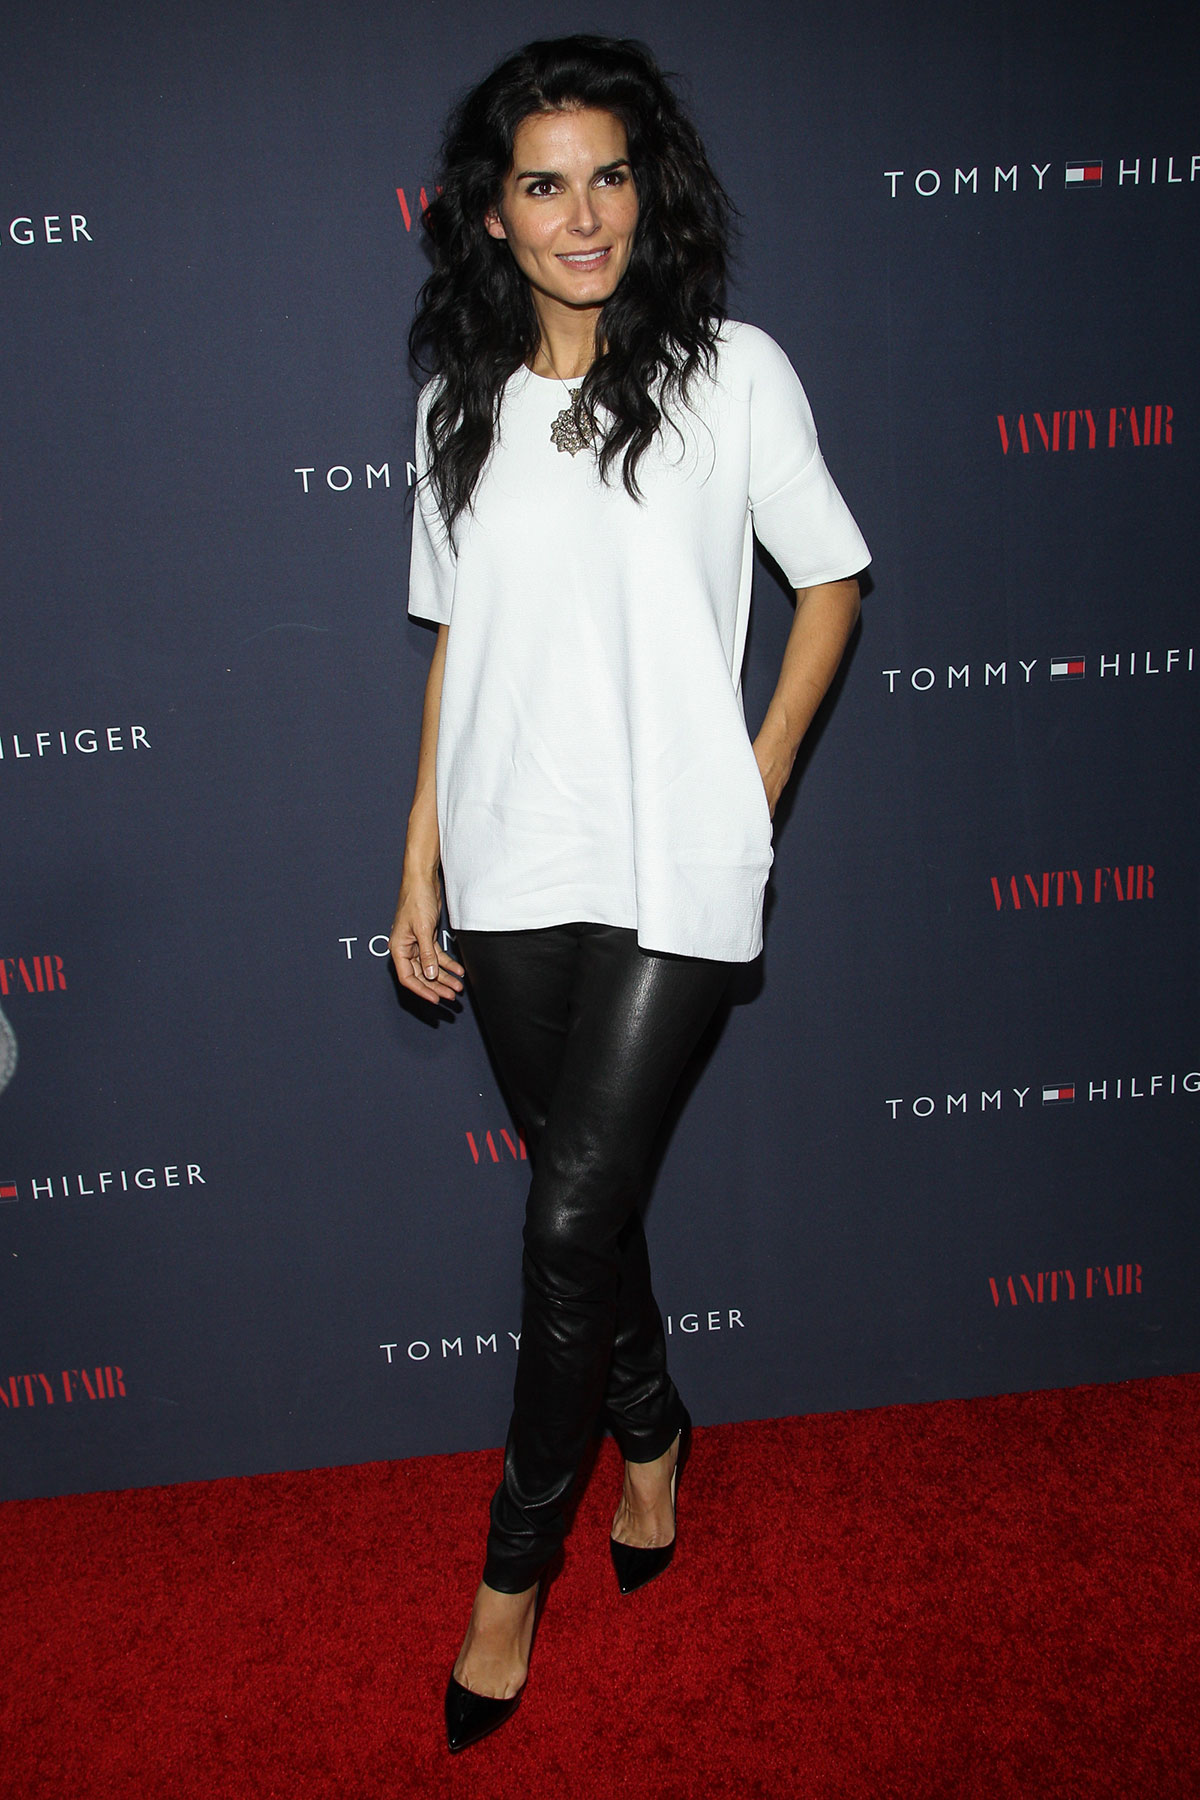 Angie Harmon attends Zooey Deschanel And Tommy Hilfiger Debut New Capsule Collection